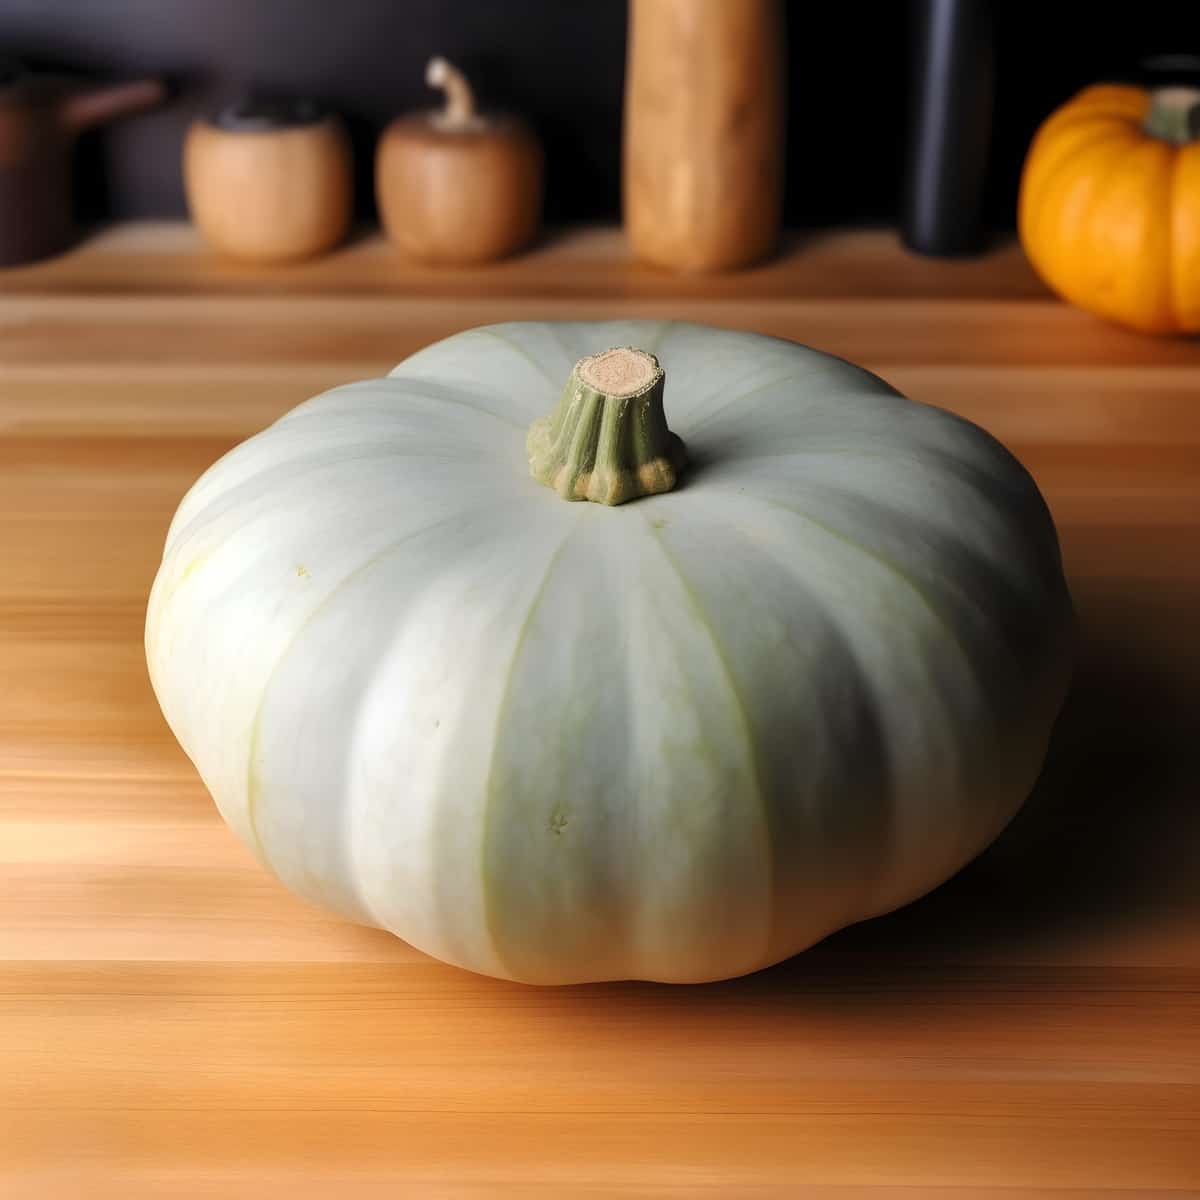 Crown Prince Squash on a kitchen counter